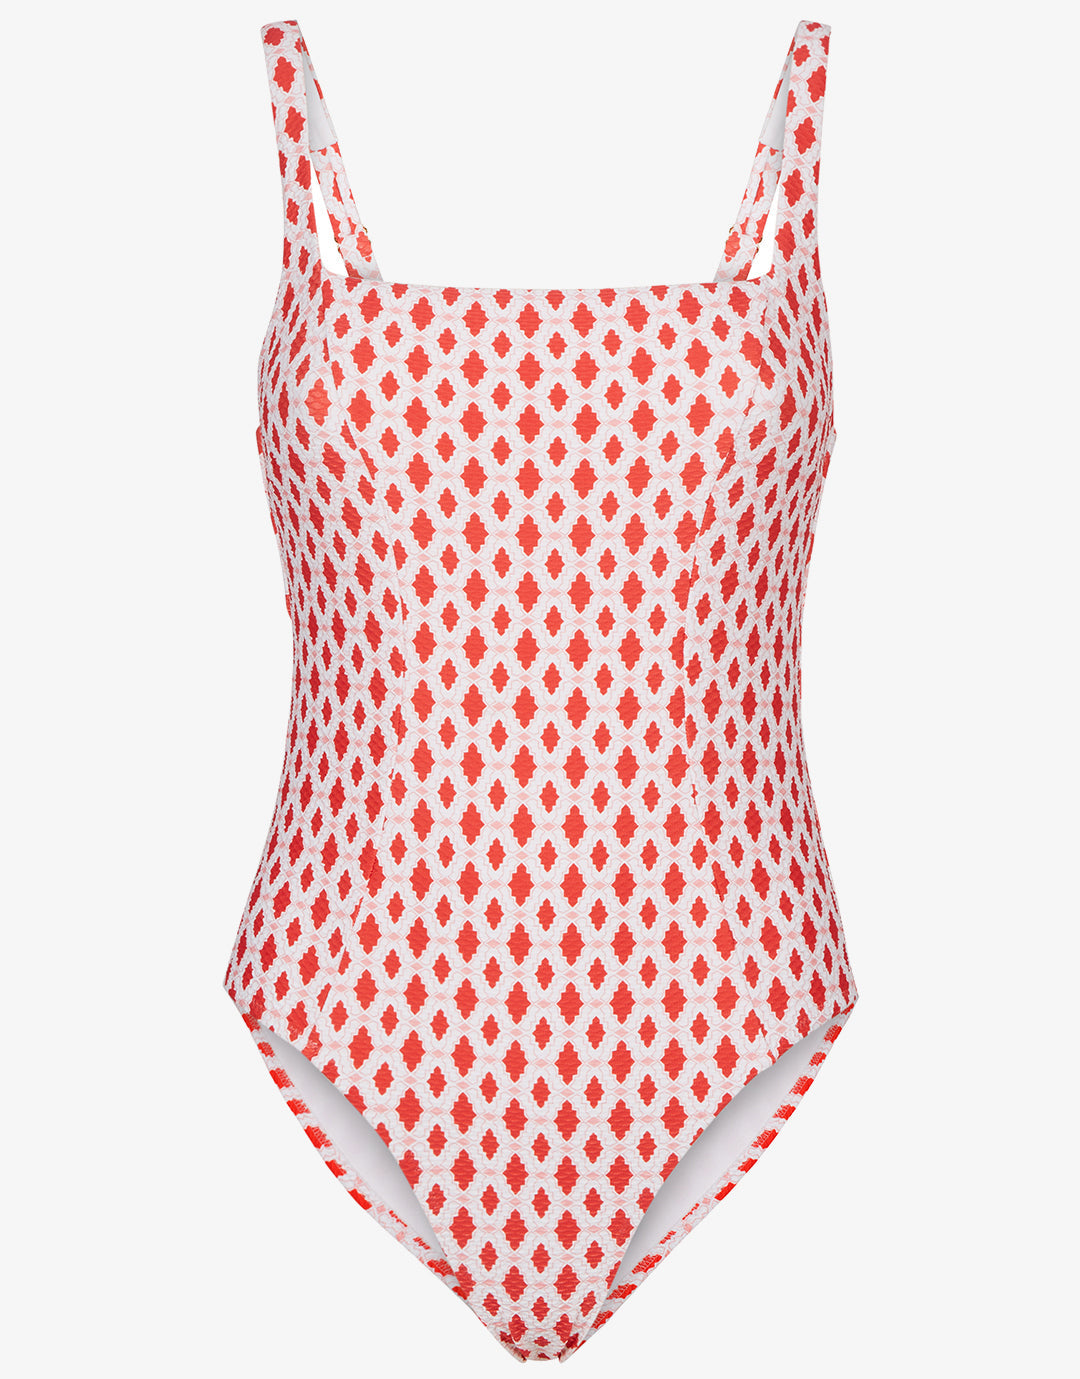 Marrakesh Tie Back One Piece Swimsuit - Red/White - Simply Beach UK